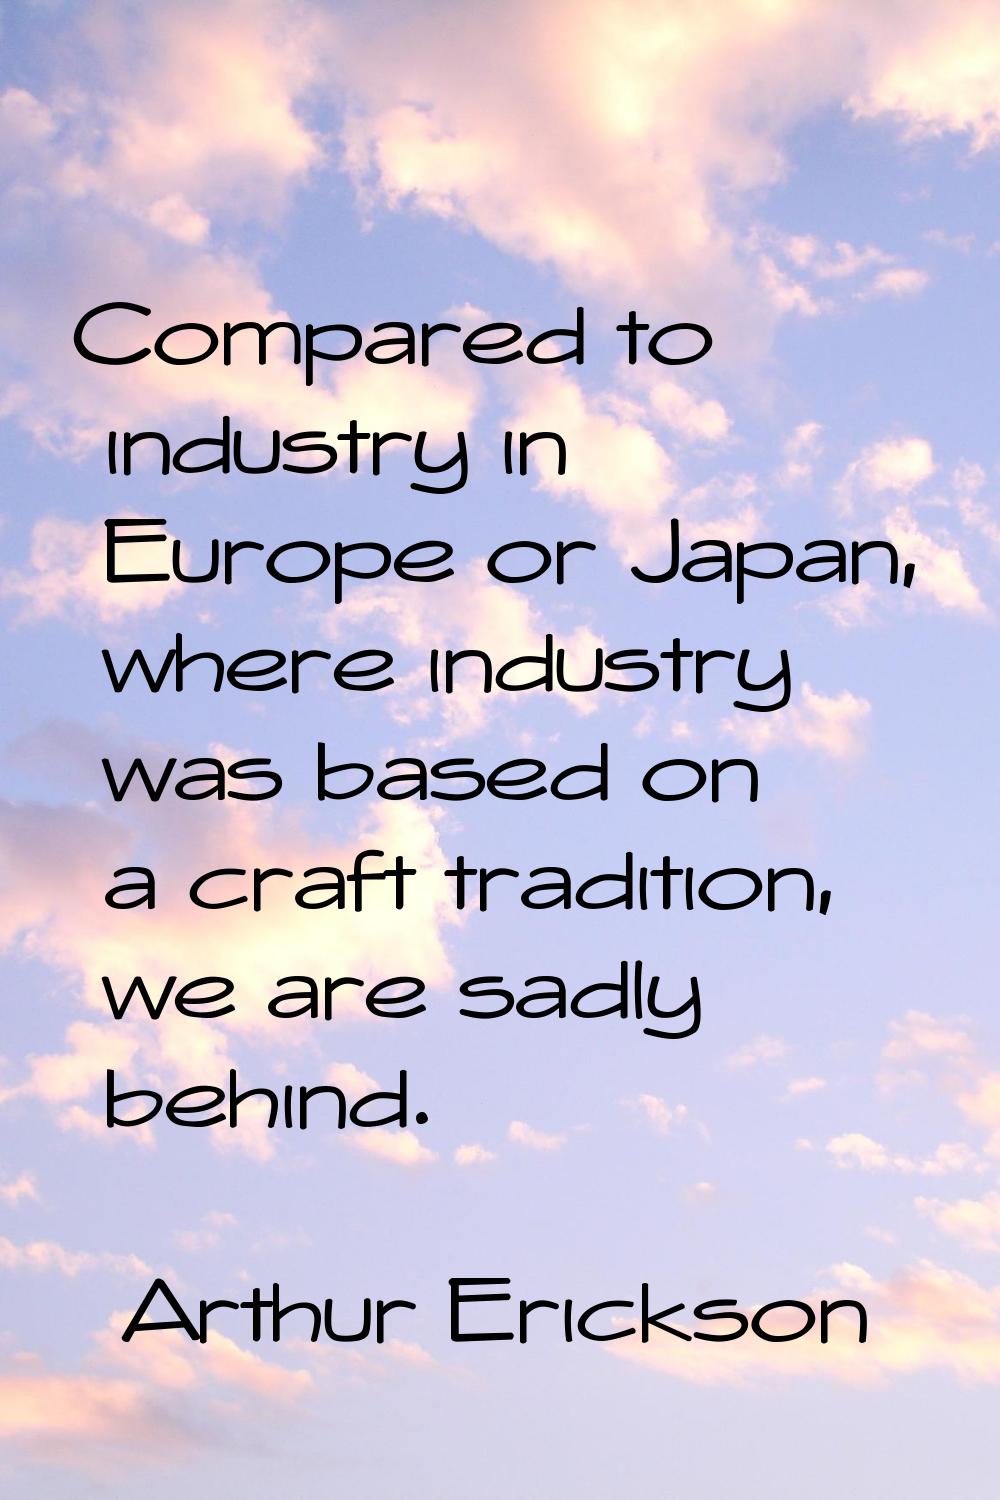 Compared to industry in Europe or Japan, where industry was based on a craft tradition, we are sadl